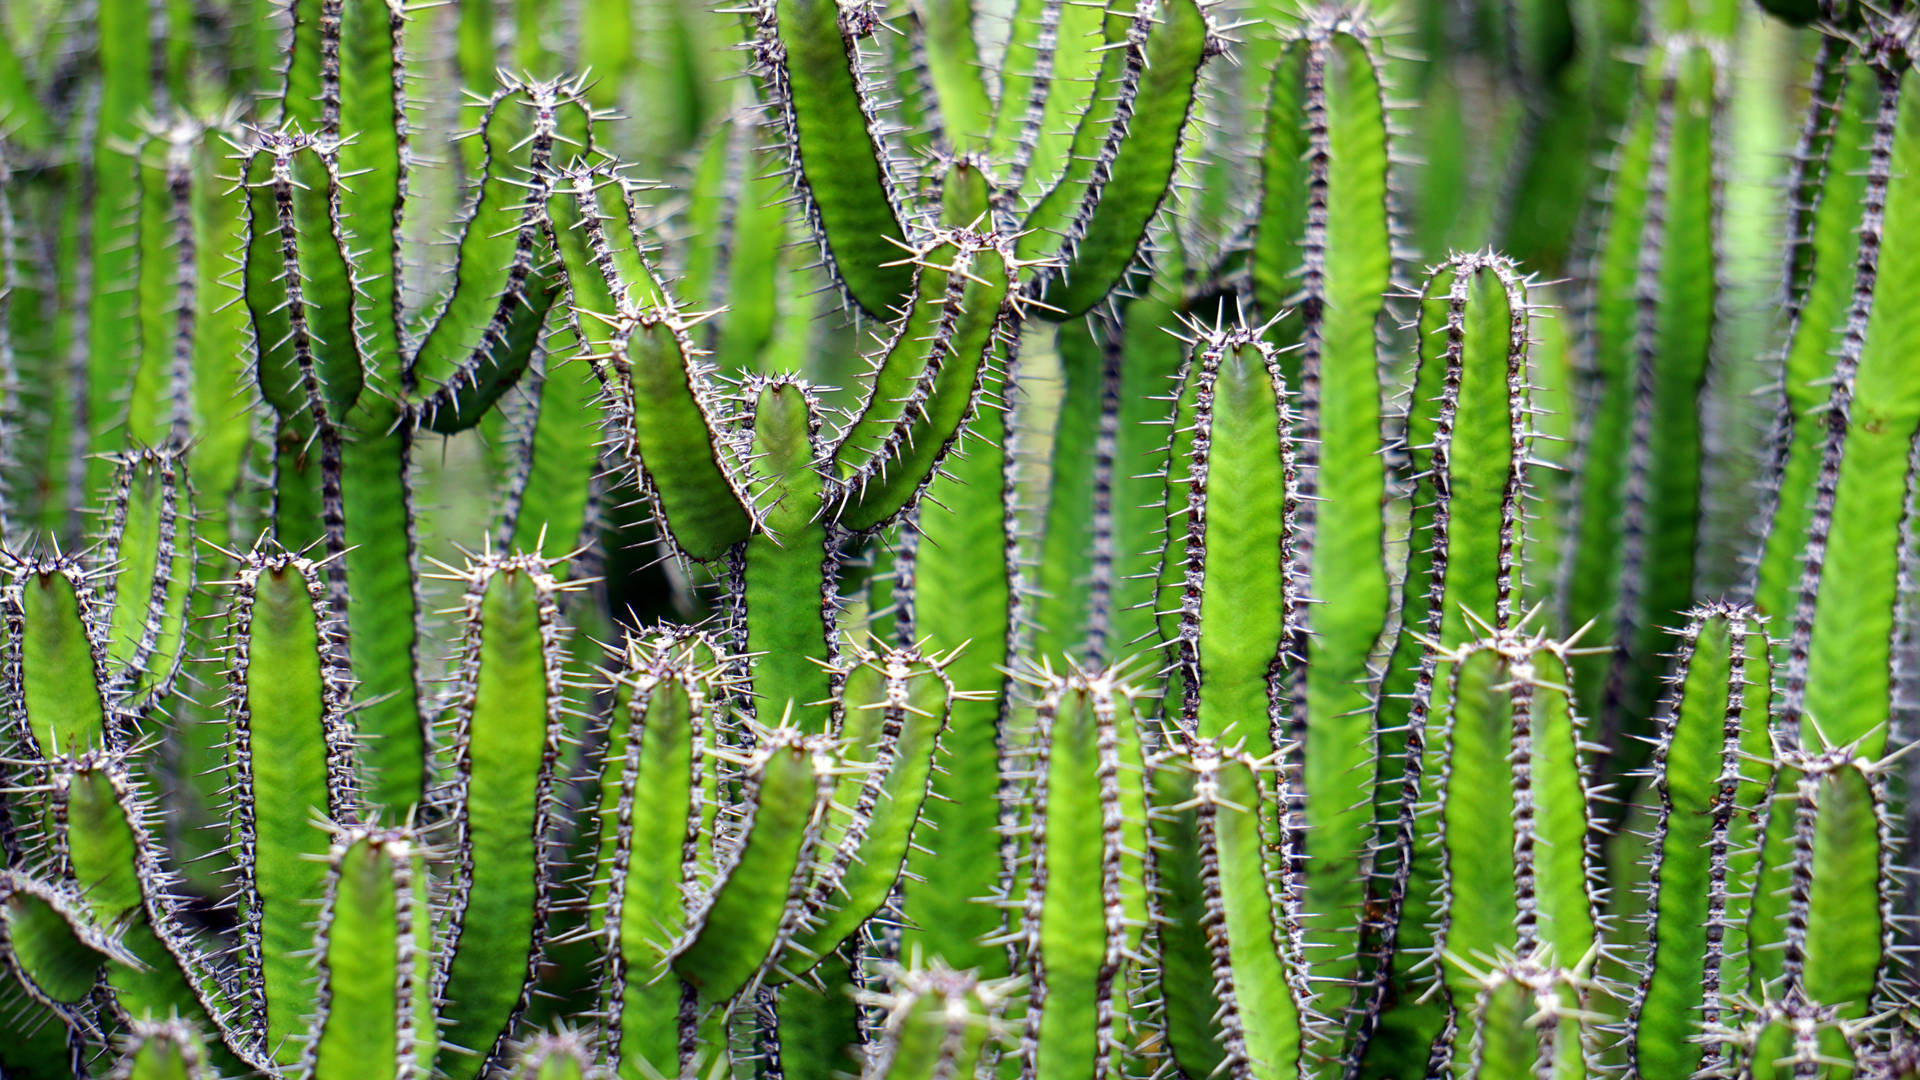 Tall Cactus Plants With White Thorns